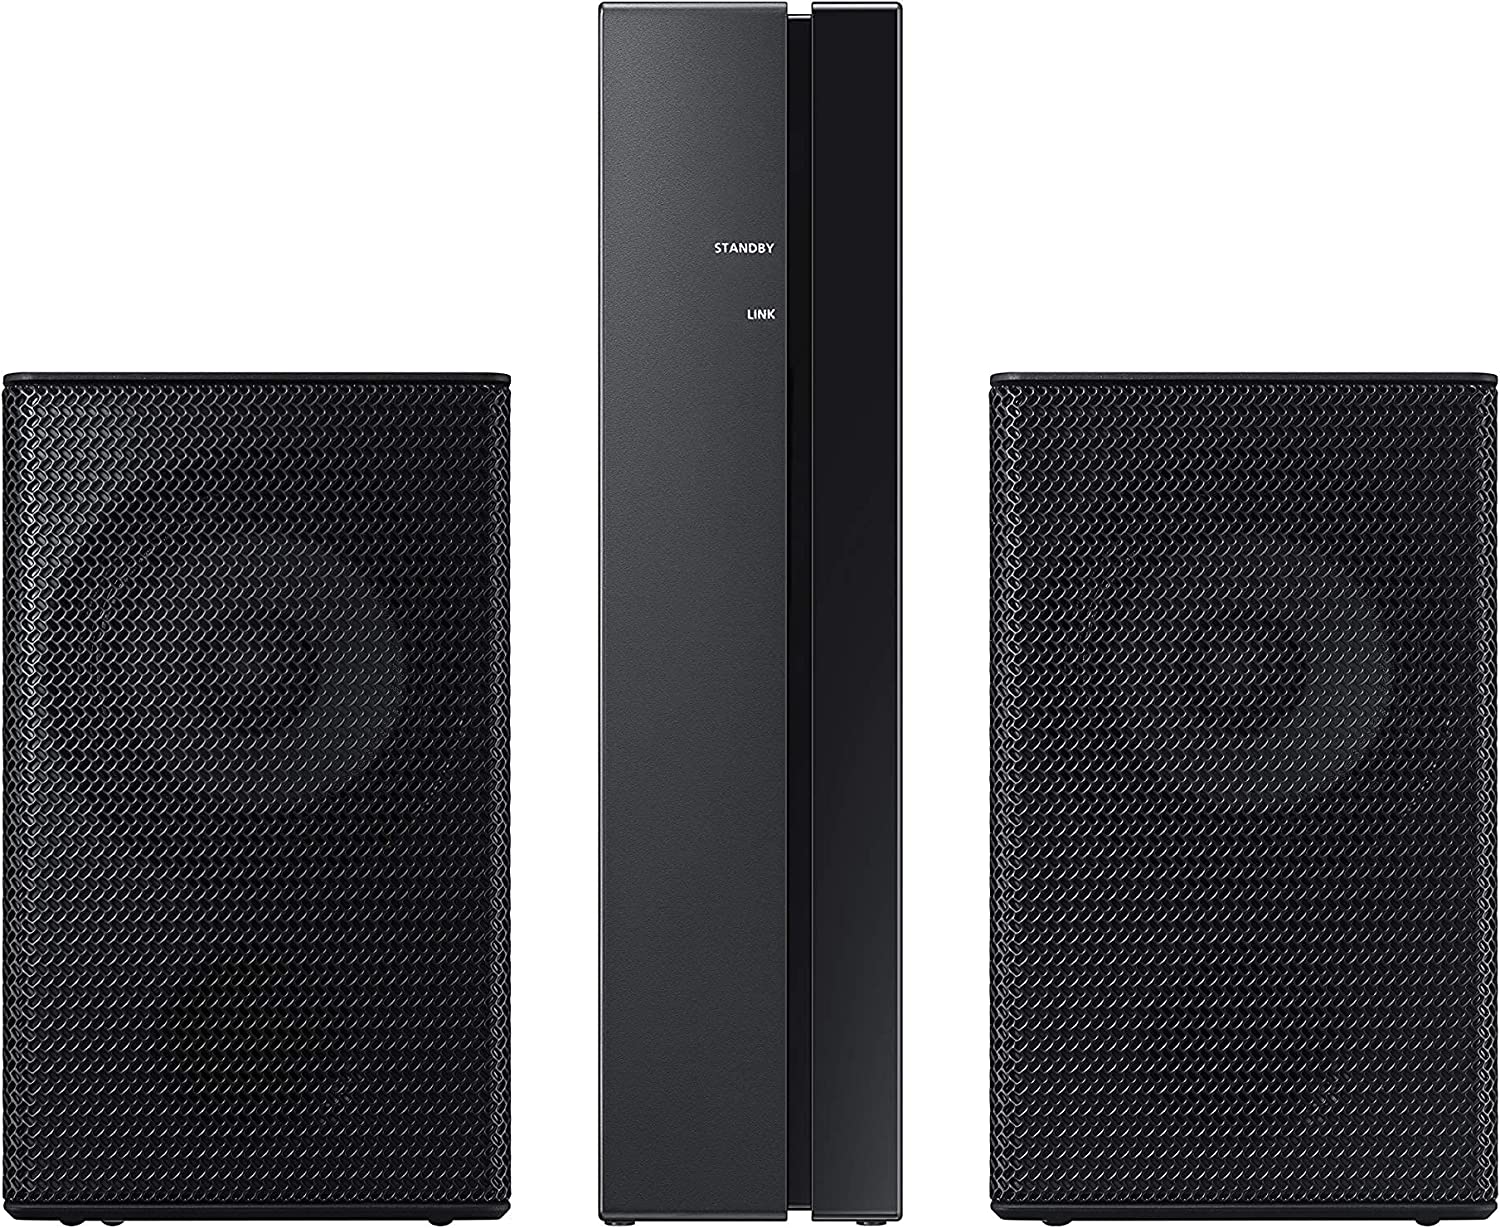 Samsung SWA-9100S 2.0-Ch Wireless Rear Speaker Kit with Surround Sound - Black (Pre-Owned)